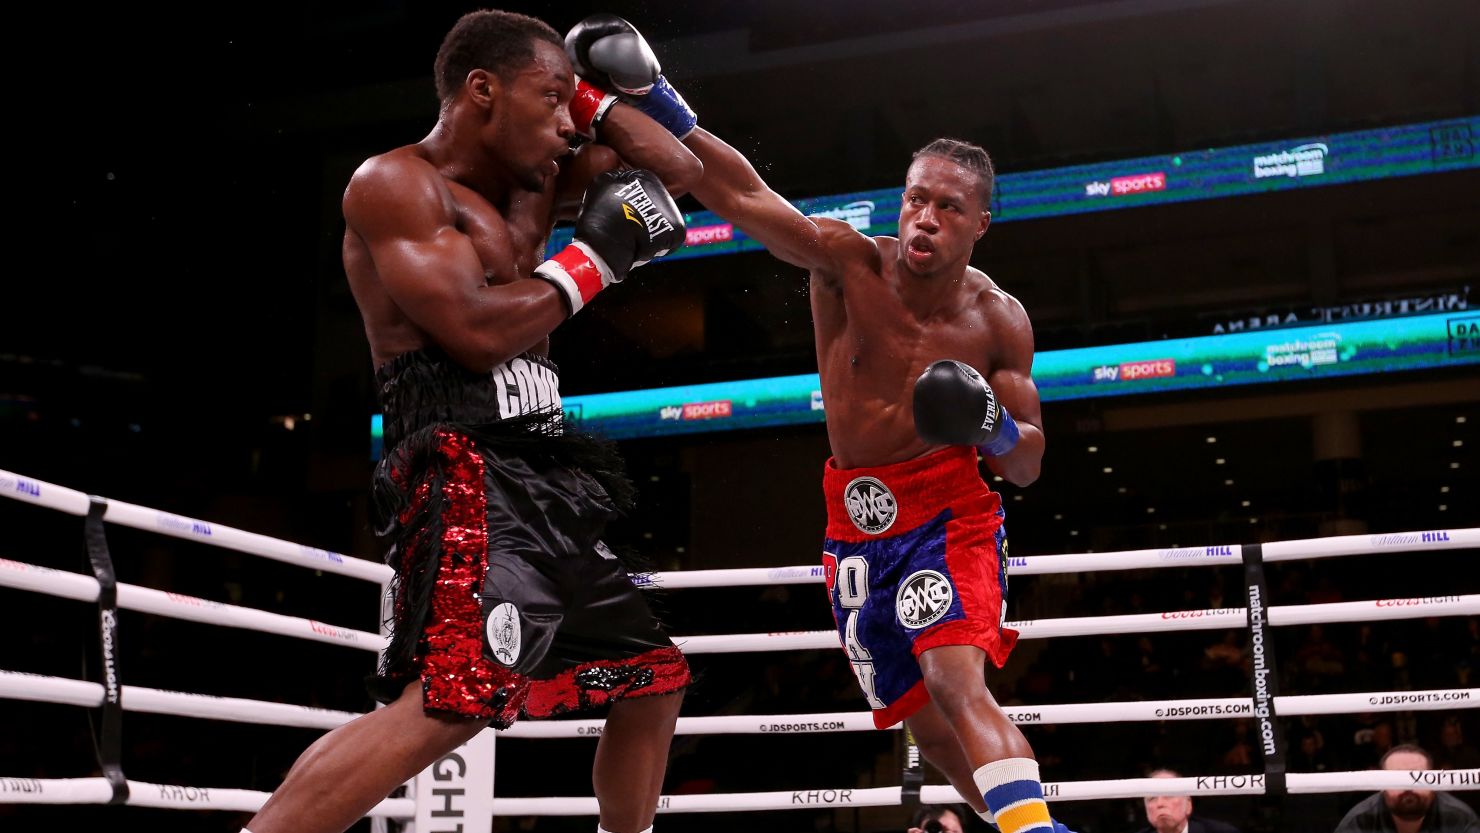 Patrick Day (R) lands a punch on Charles Conwell in the third round of their super-welterweight fight.